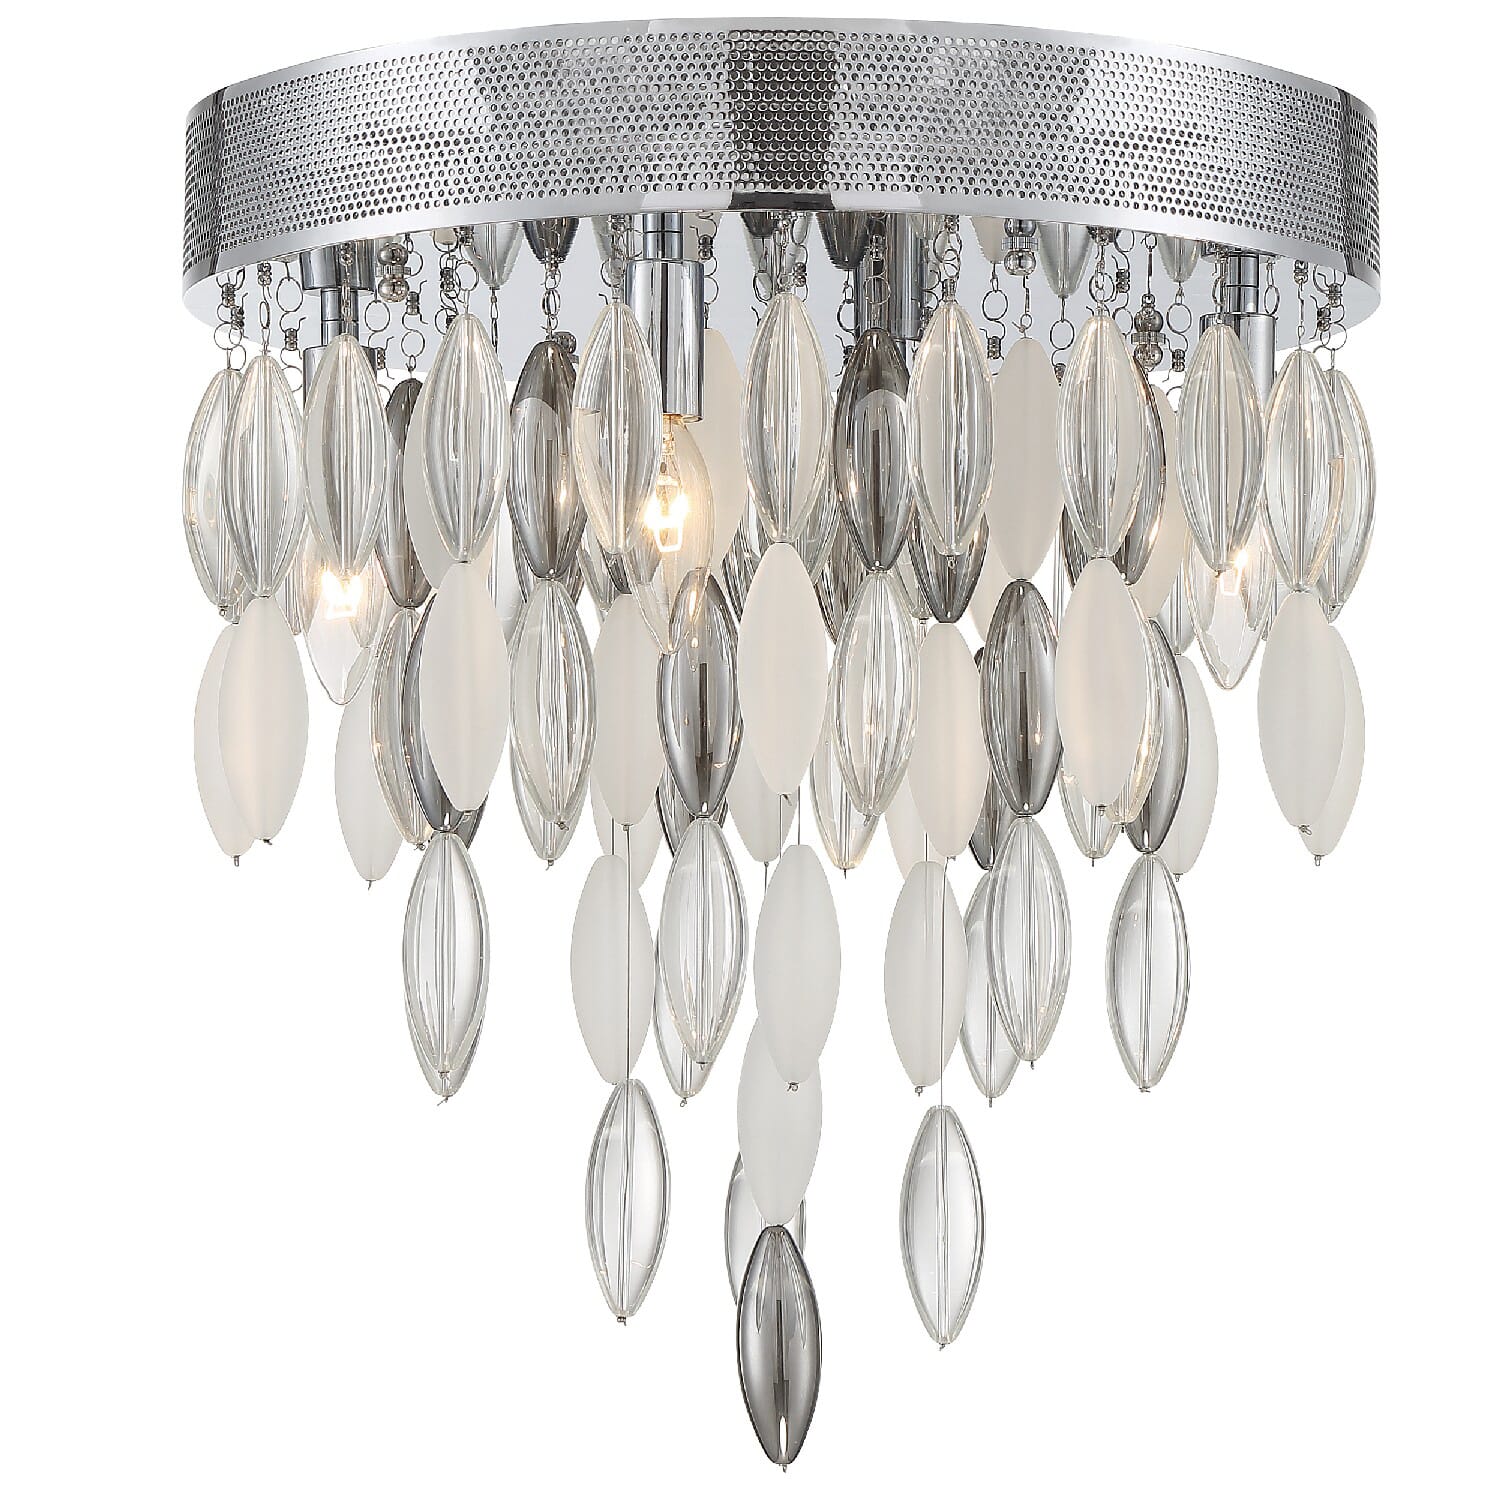 Crystorama Hudson 4-Light Ceiling Light in Polished Chrome with Frosted, Silver & Clear Glass Beads Crystals